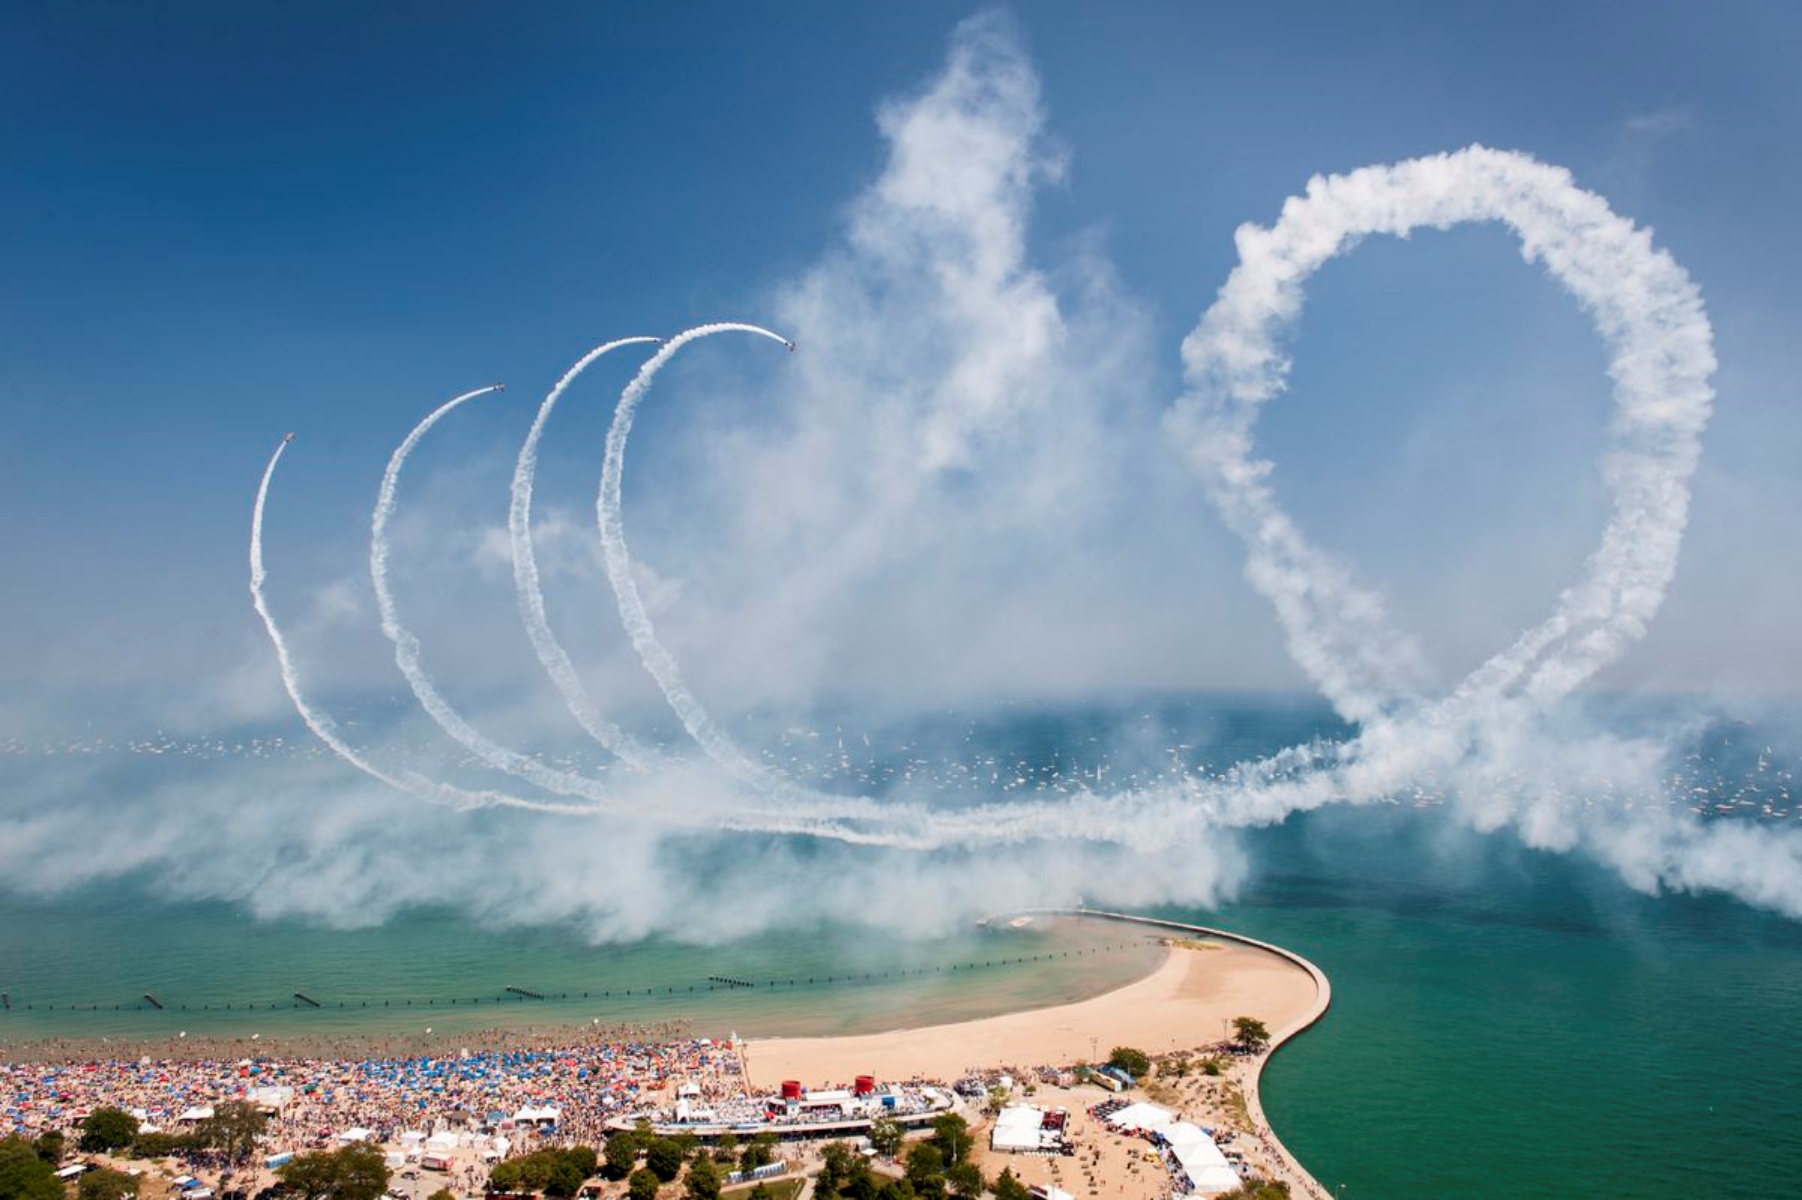 17 Facts About Air And Water Show